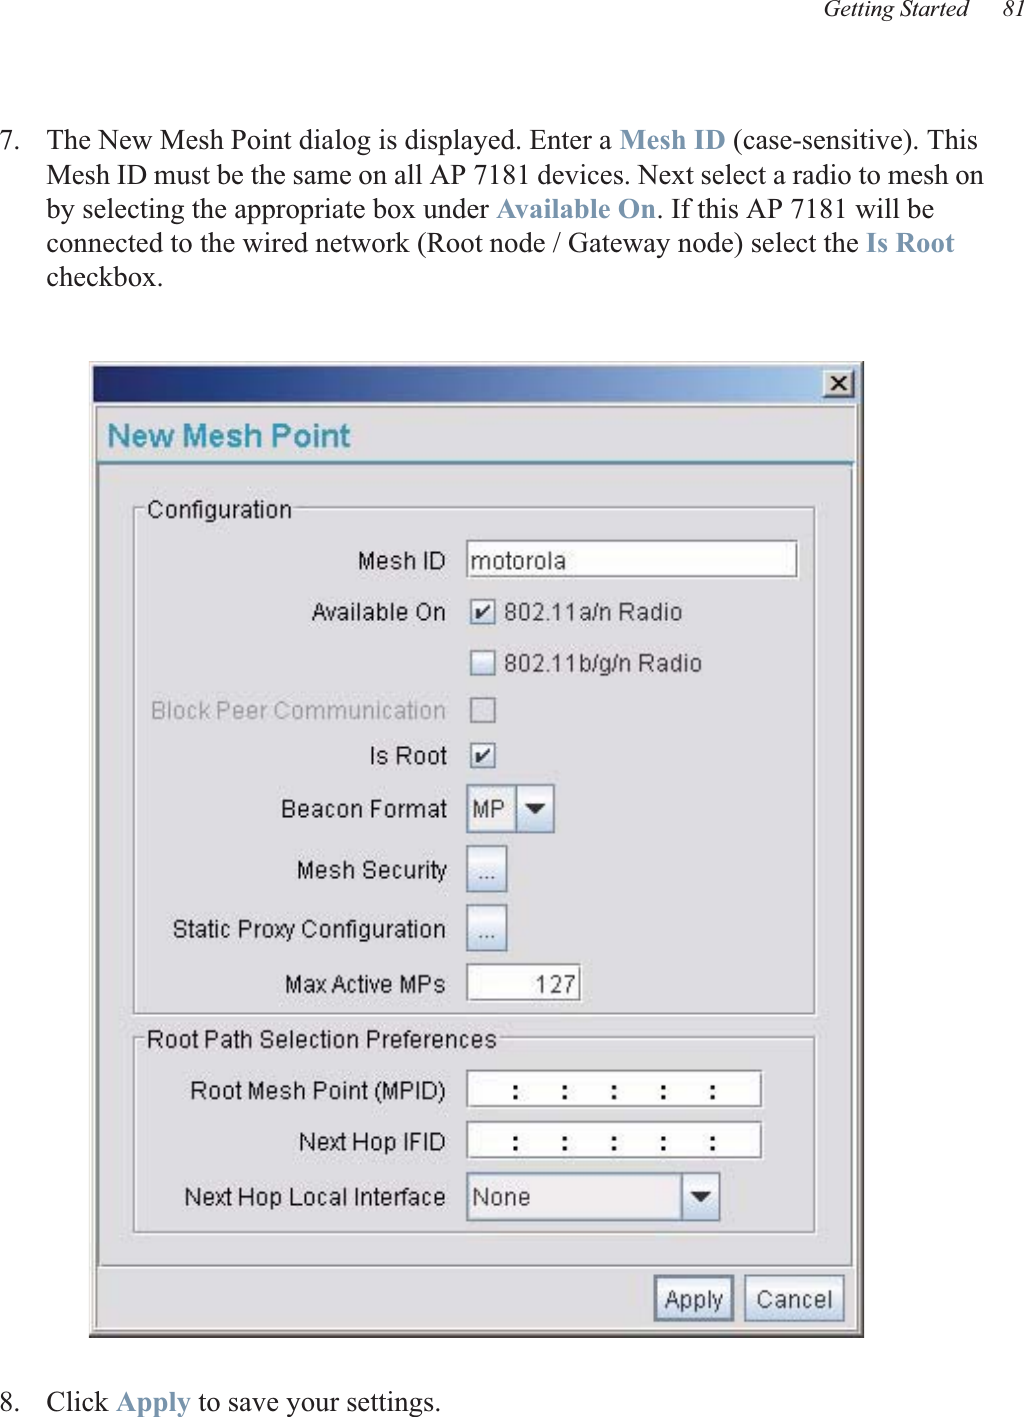 Getting Started 817. The New Mesh Point dialog is displayed. Enter a Mesh ID (case-sensitive). This Mesh ID must be the same on all AP 7181 devices. Next select a radio to mesh on by selecting the appropriate box under Available On. If this AP 7181 will be connected to the wired network (Root node / Gateway node) select the Is Root checkbox.8. Click Apply to save your settings.